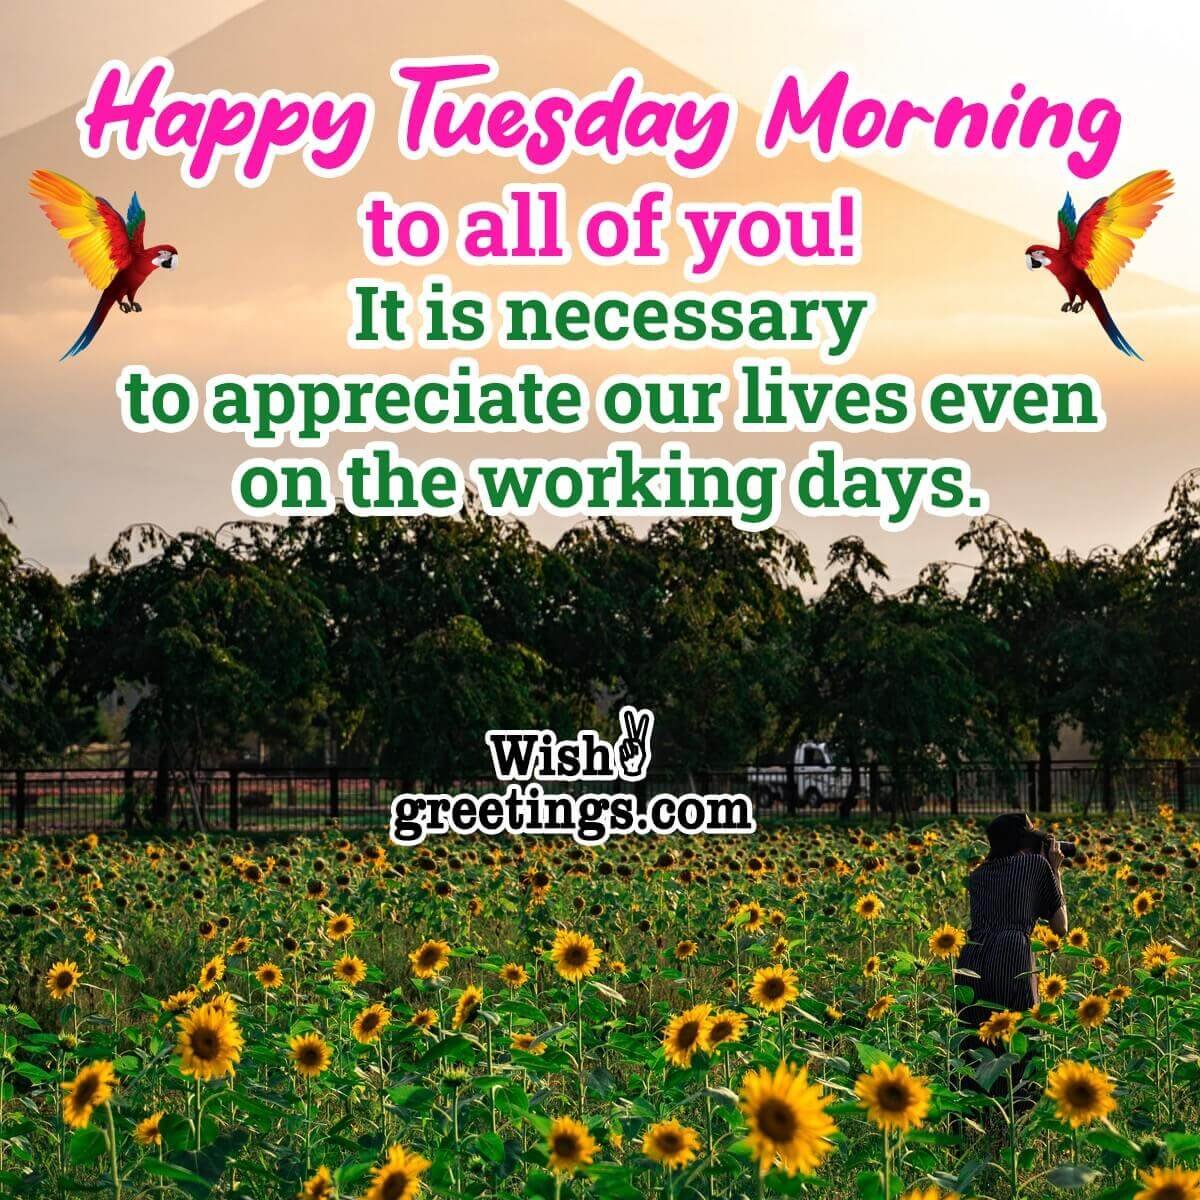 Tuesday Morning Wishes - Wish Greetings